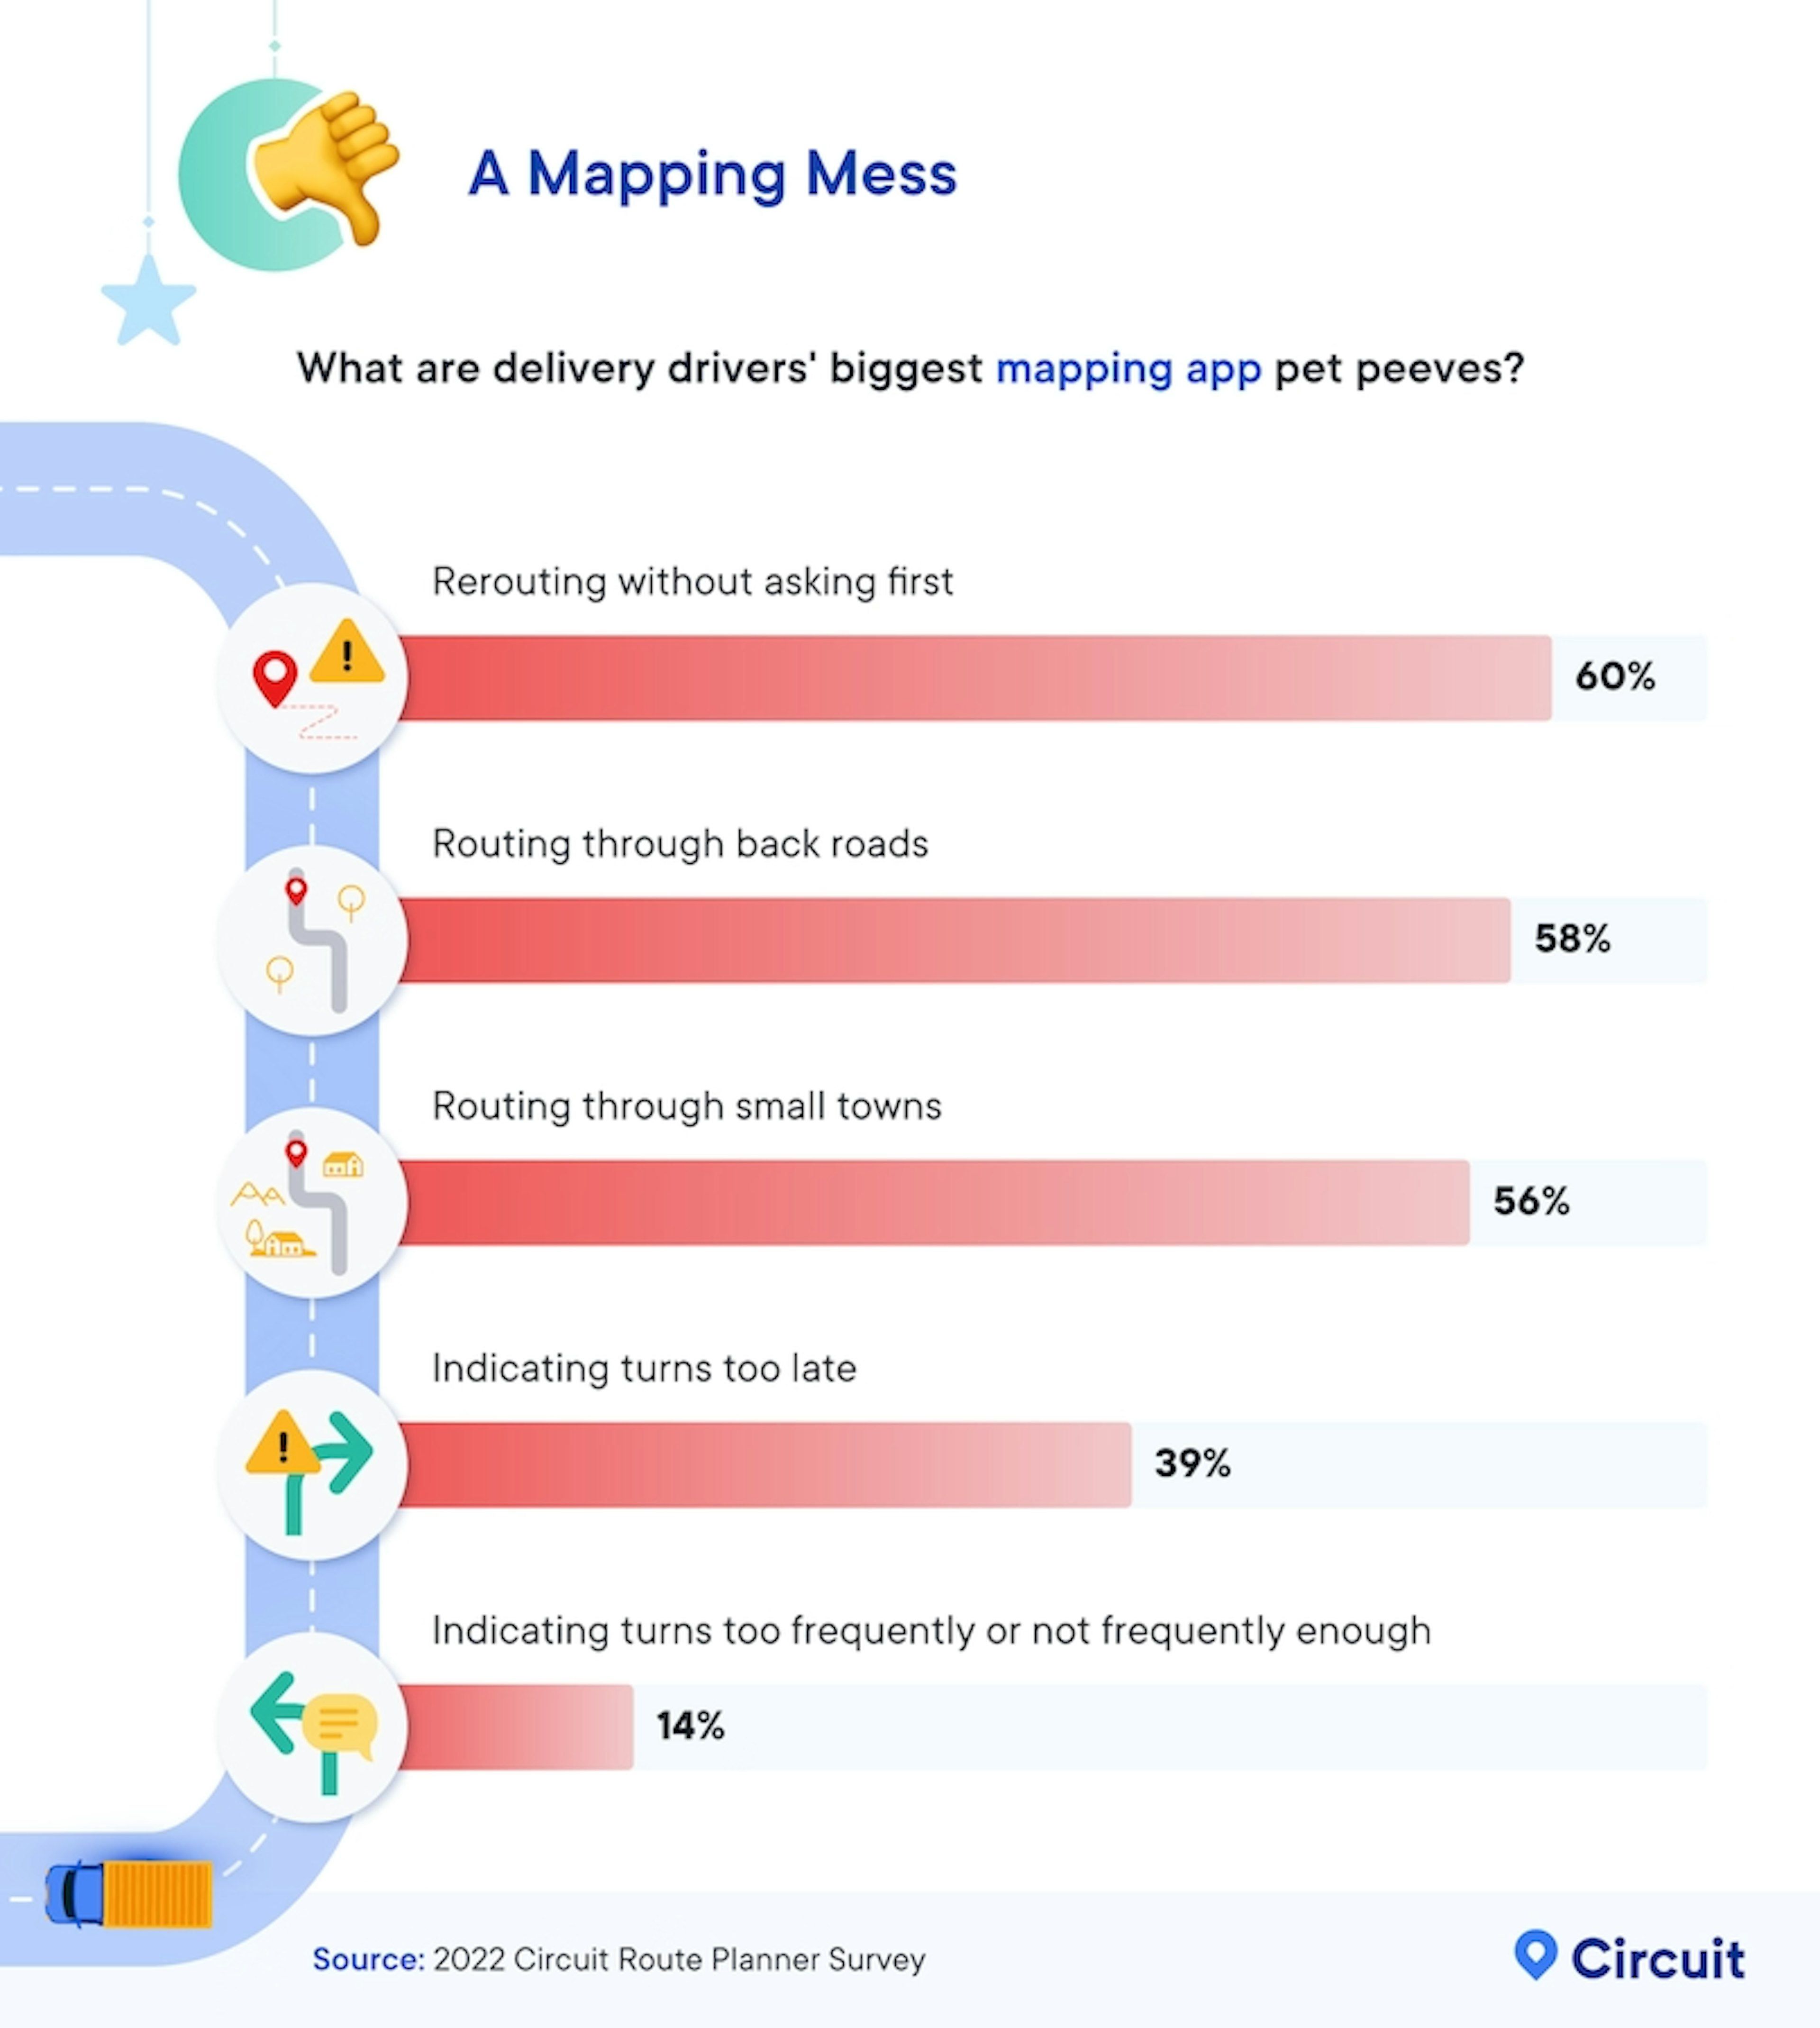 Expressive infographic titled 'A Mapping Mess: Delivery Drivers' Biggest Pet Peeves,' revealing the frustration of drivers with a bar chart showing 60% disliking routing without asking, 58% dreading back road detours, and 56% lamenting small town routes, all against a background of a winding road adorned with emoticons reflecting their emotions.